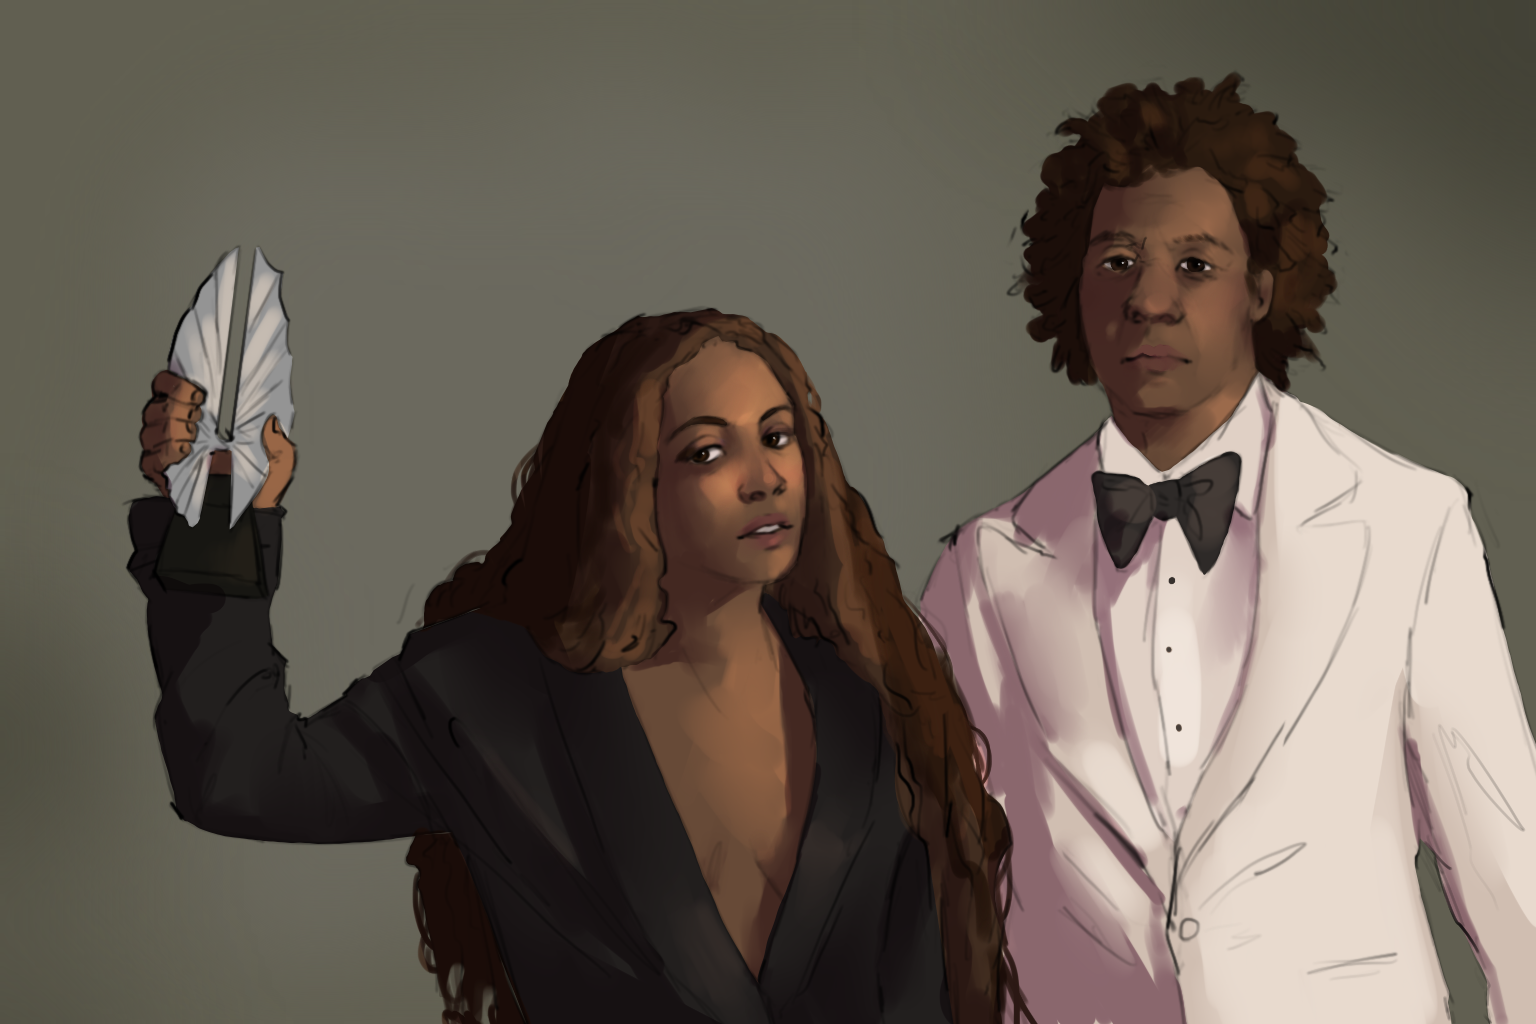 An illustration of pop and R&B singers Jay-Z and Beyoncé.